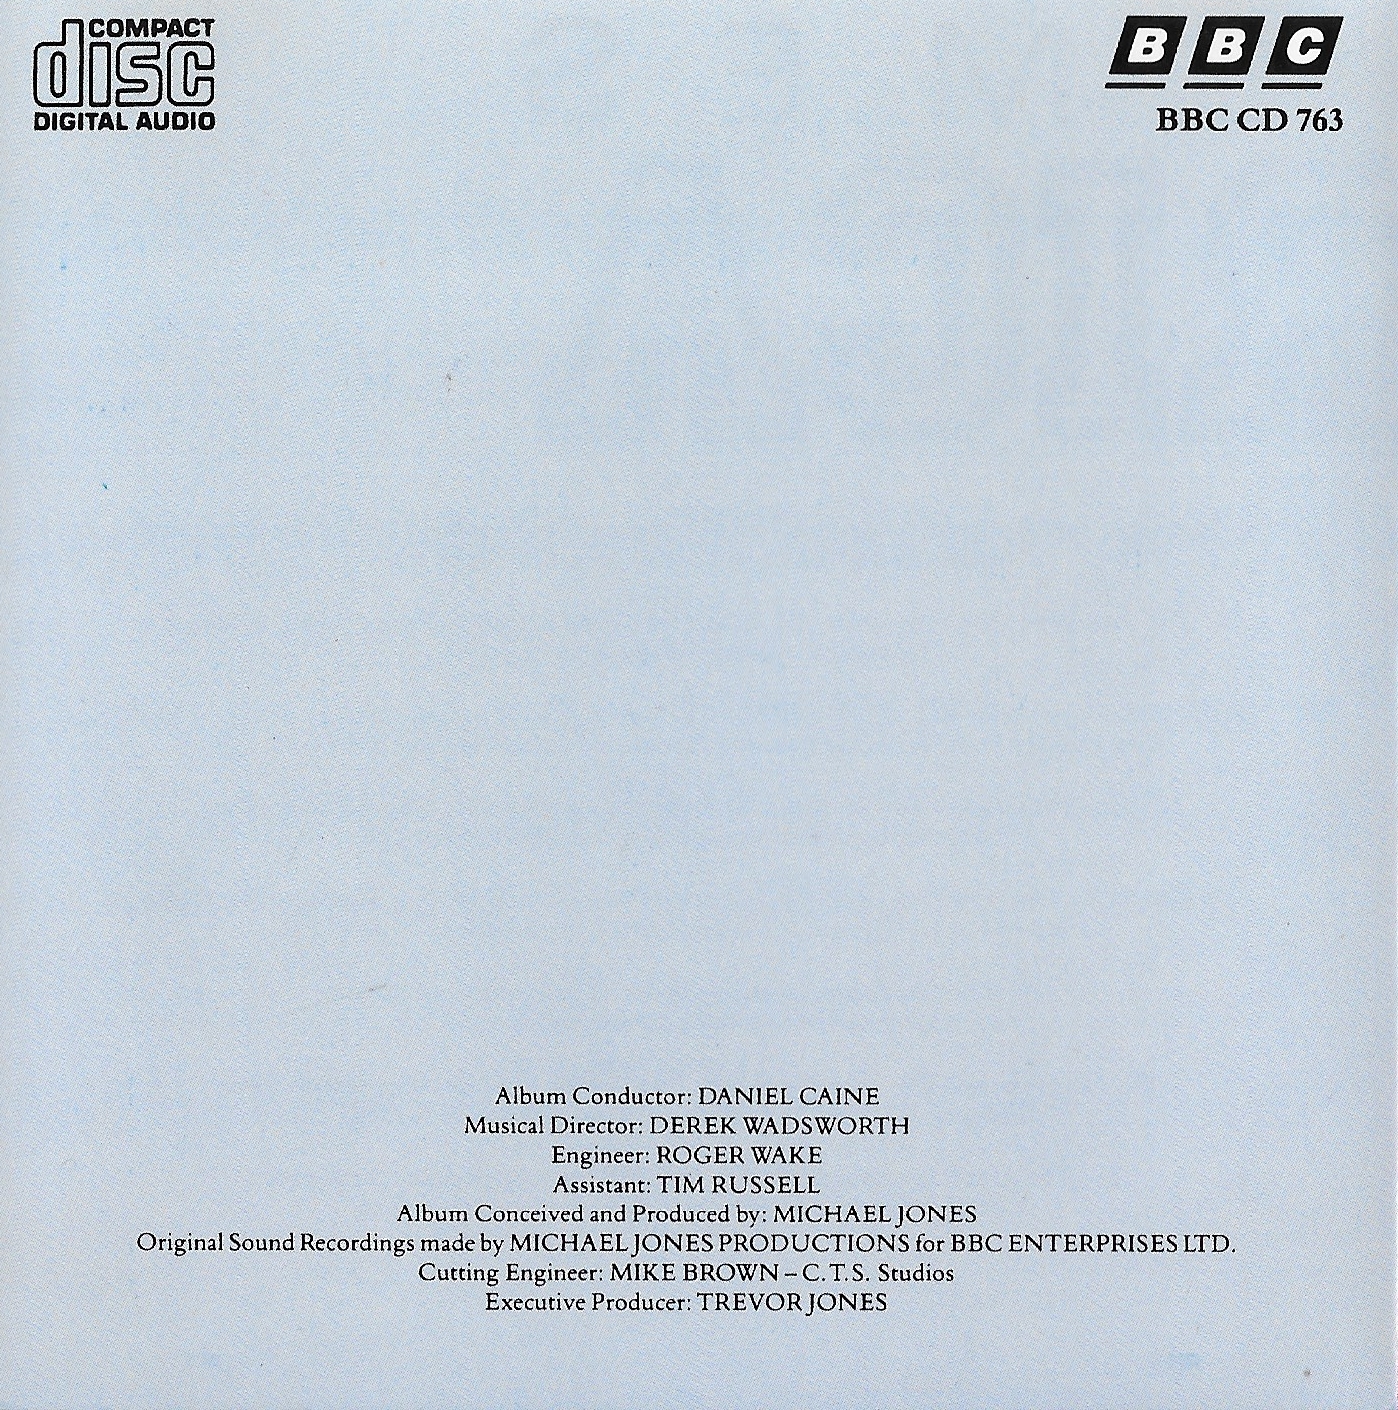 Middle of cover of BBCCD763